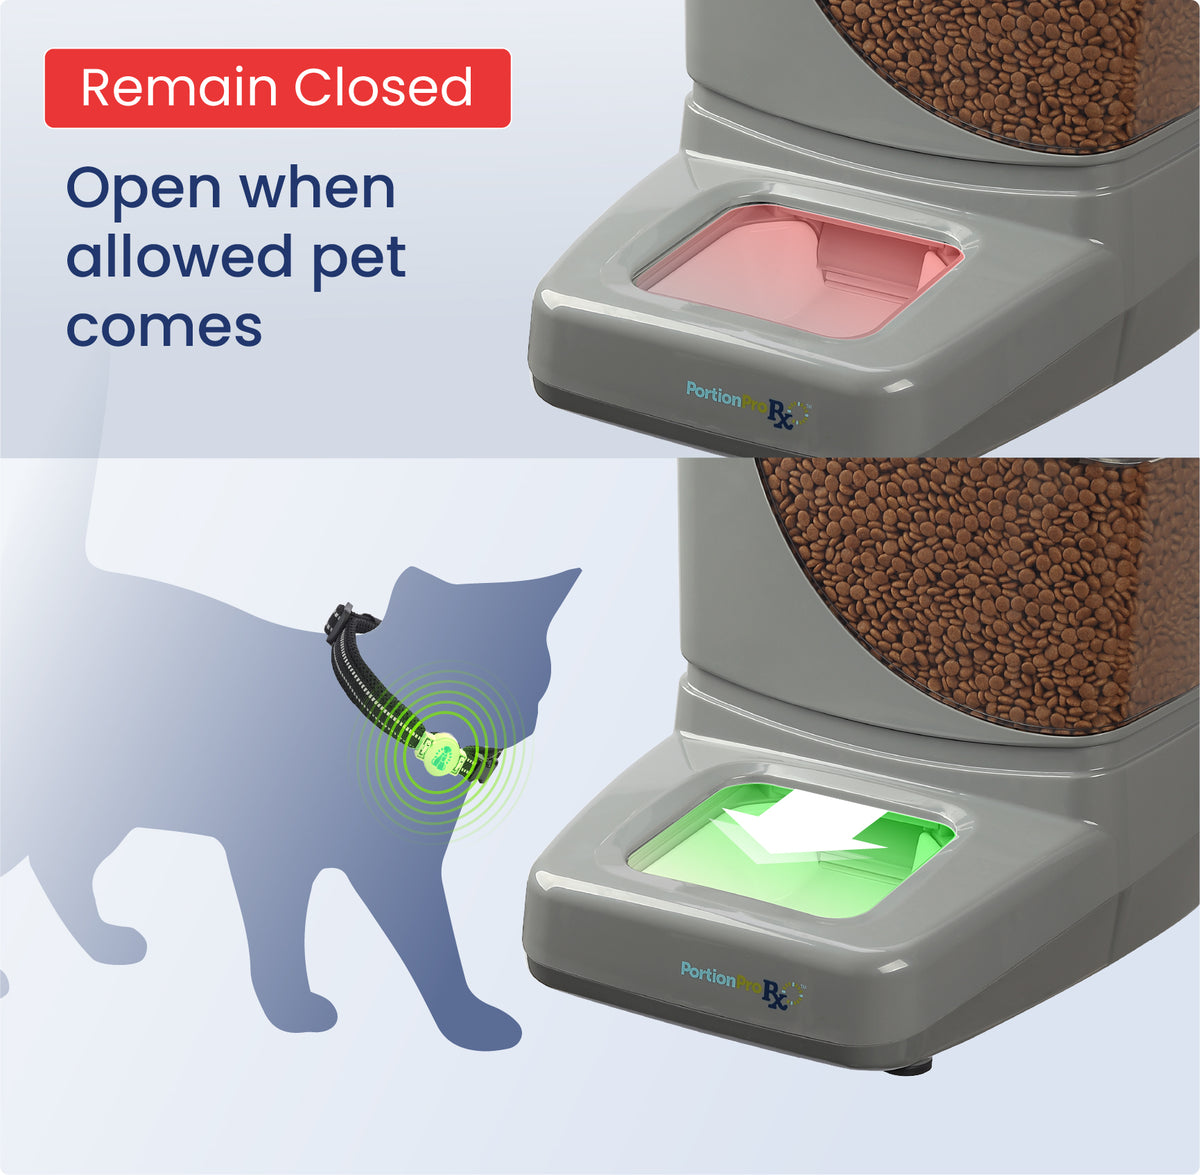 the portionpro rx rfid close mode excludes all other animals except the animal with the rfid tag to ensure exclusive meals to dedicated pet.